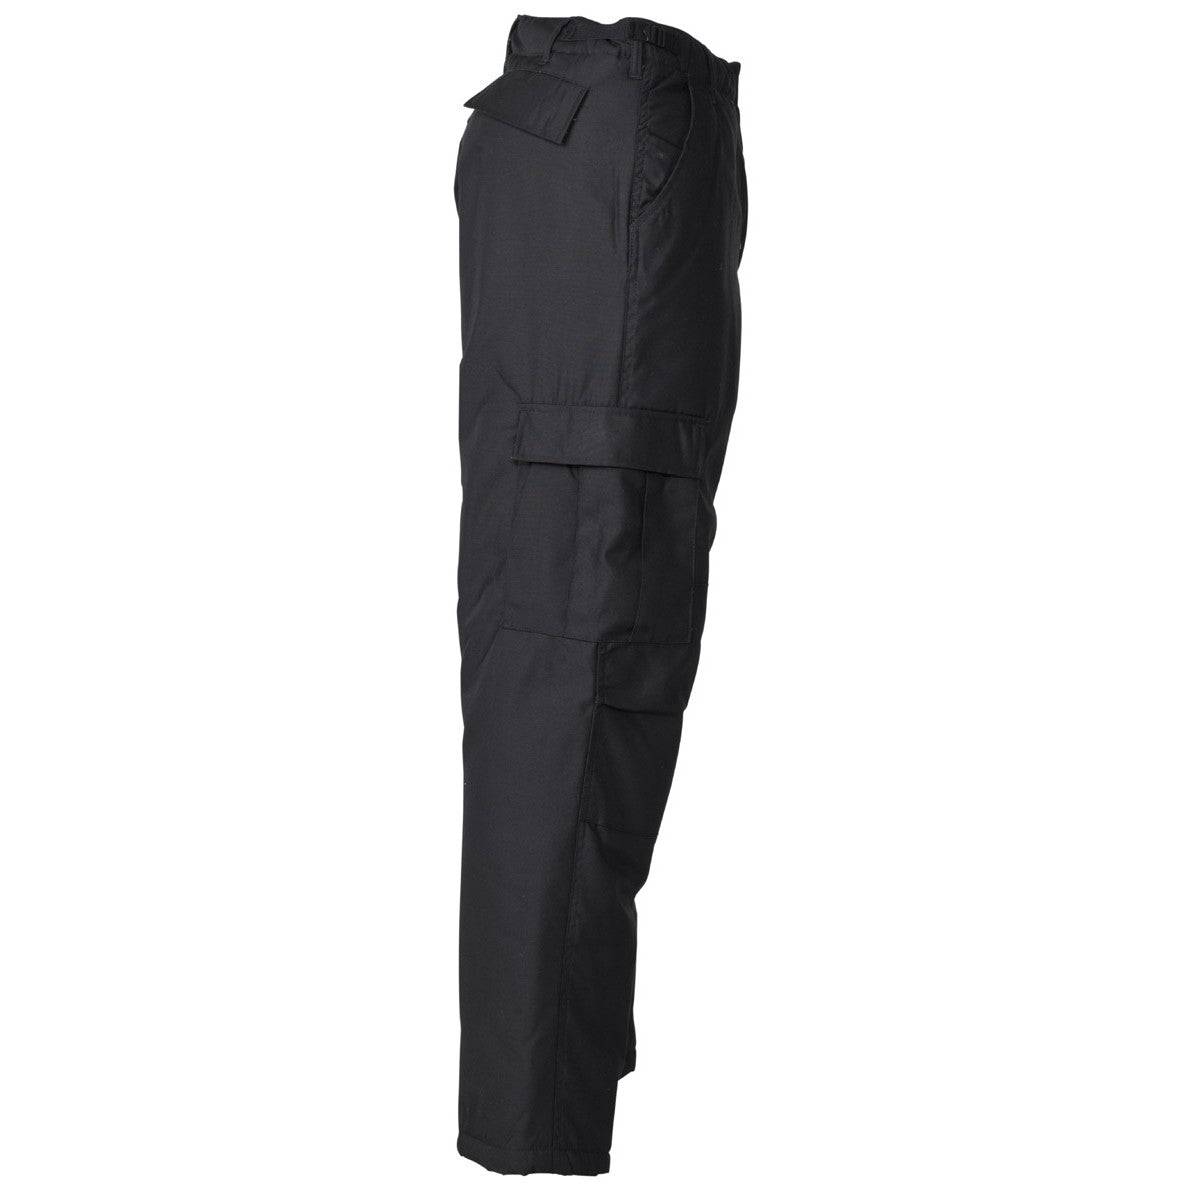 US combat trousers, lined, black